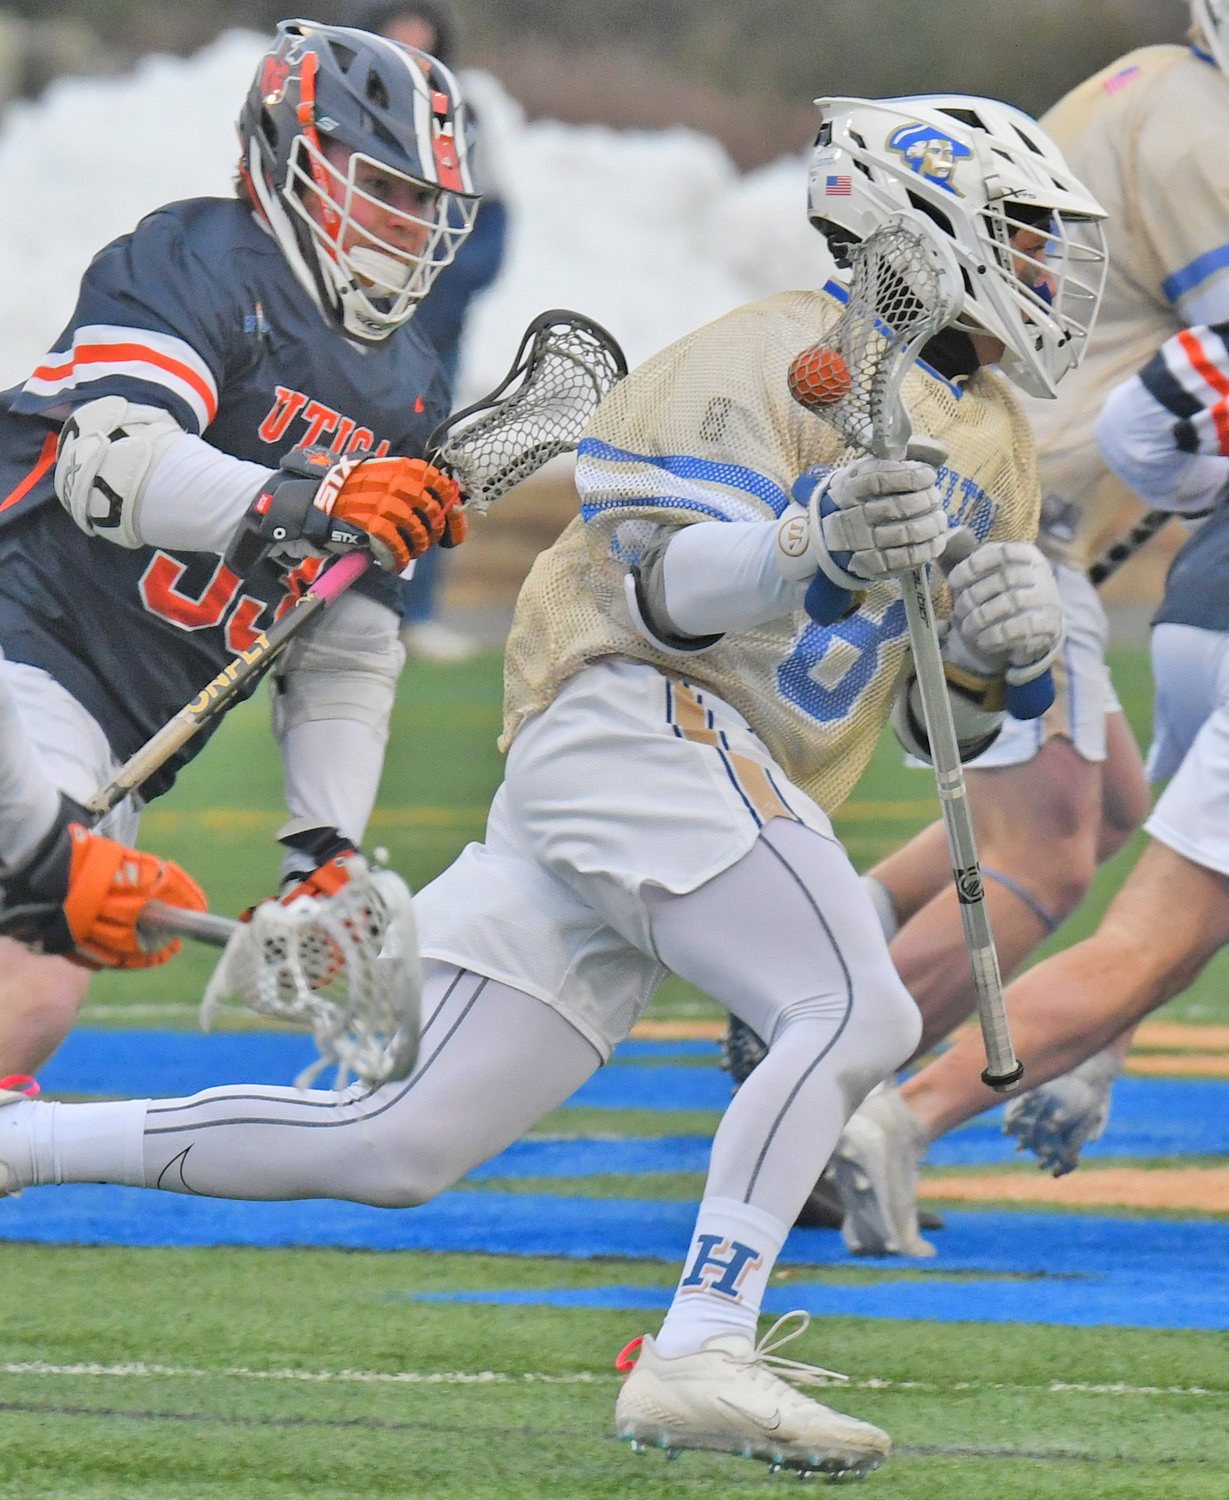 ON THE RUN — Hamilton College's Michael Scoleri runs up field as Utica University's Jack Hogan defends during Tuesday's men's lacrosse game at Hamilton College's Withiam Field in Clinton.